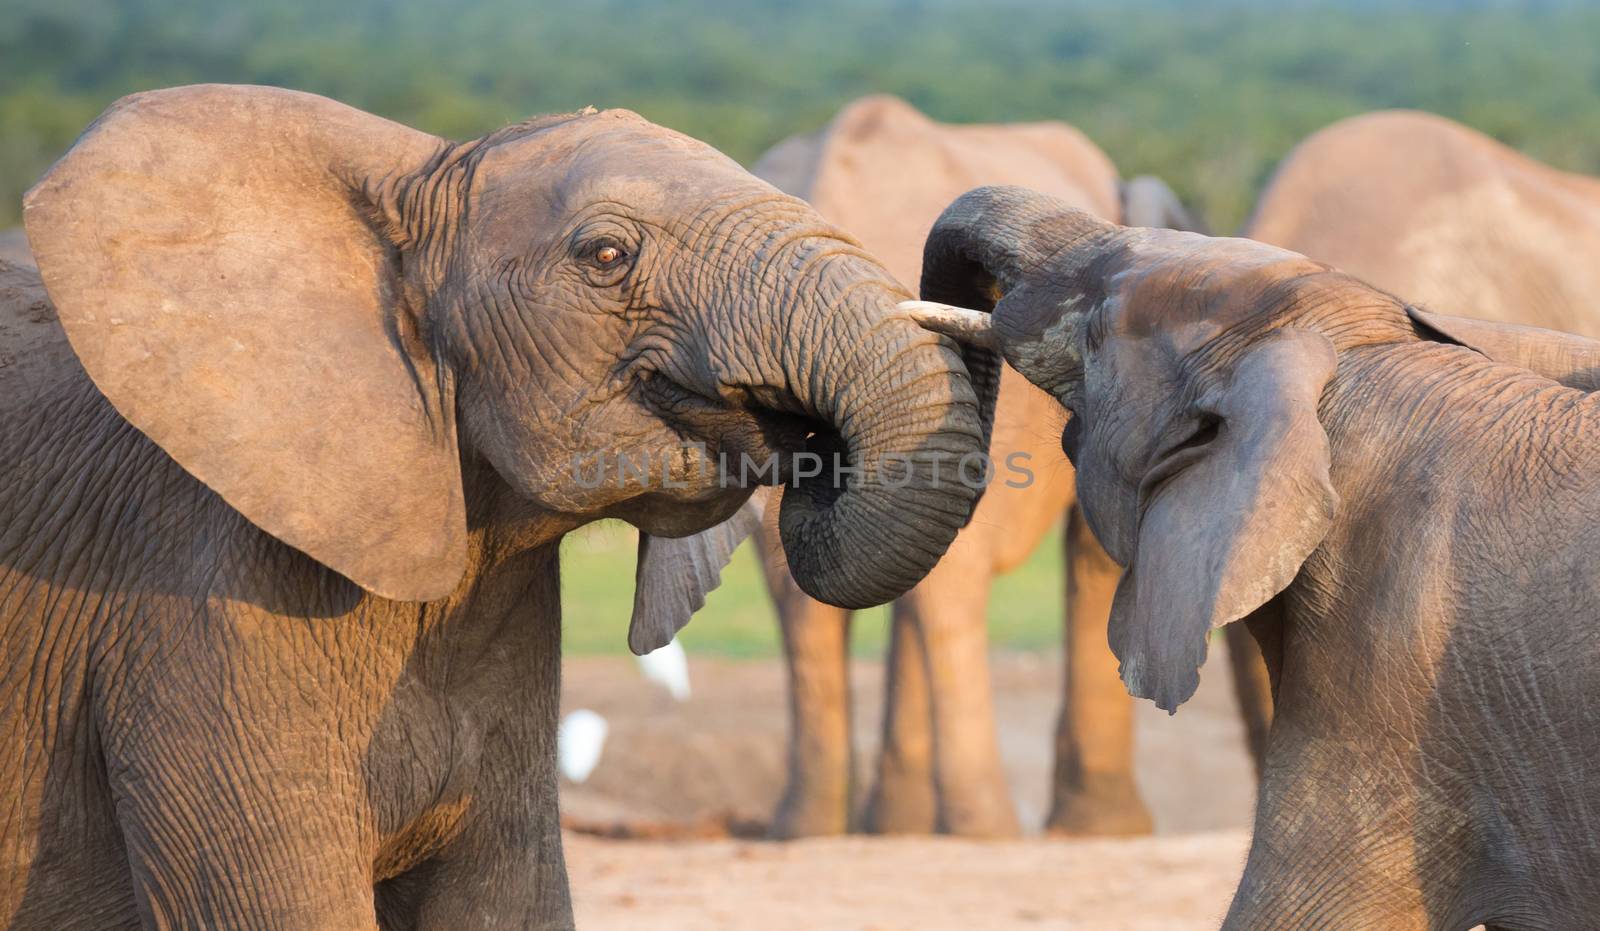 Two young elephants greeting each other with trunks touching